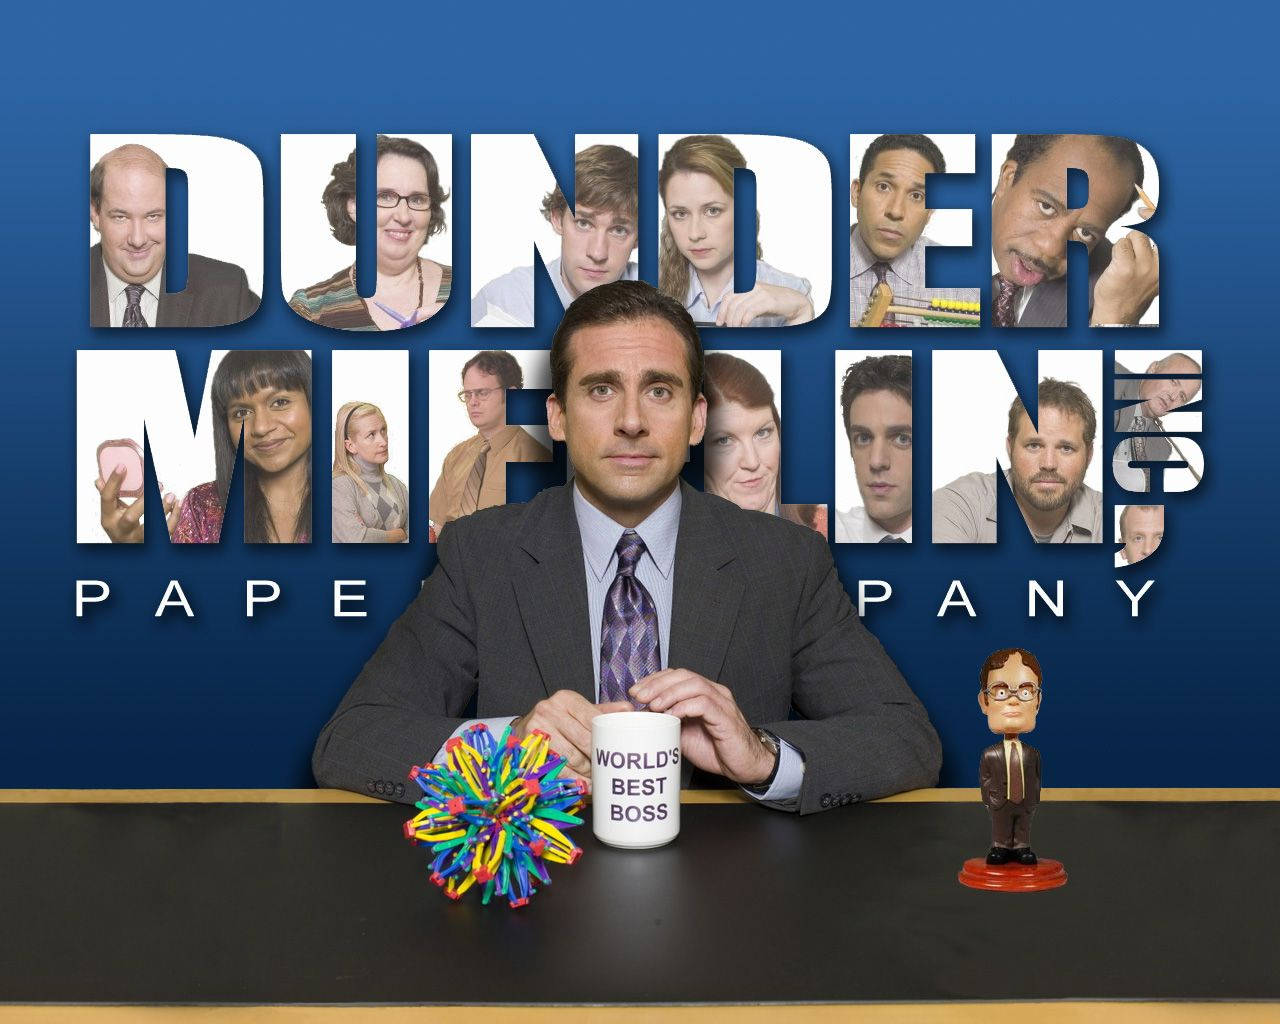 The Office Wallpapers